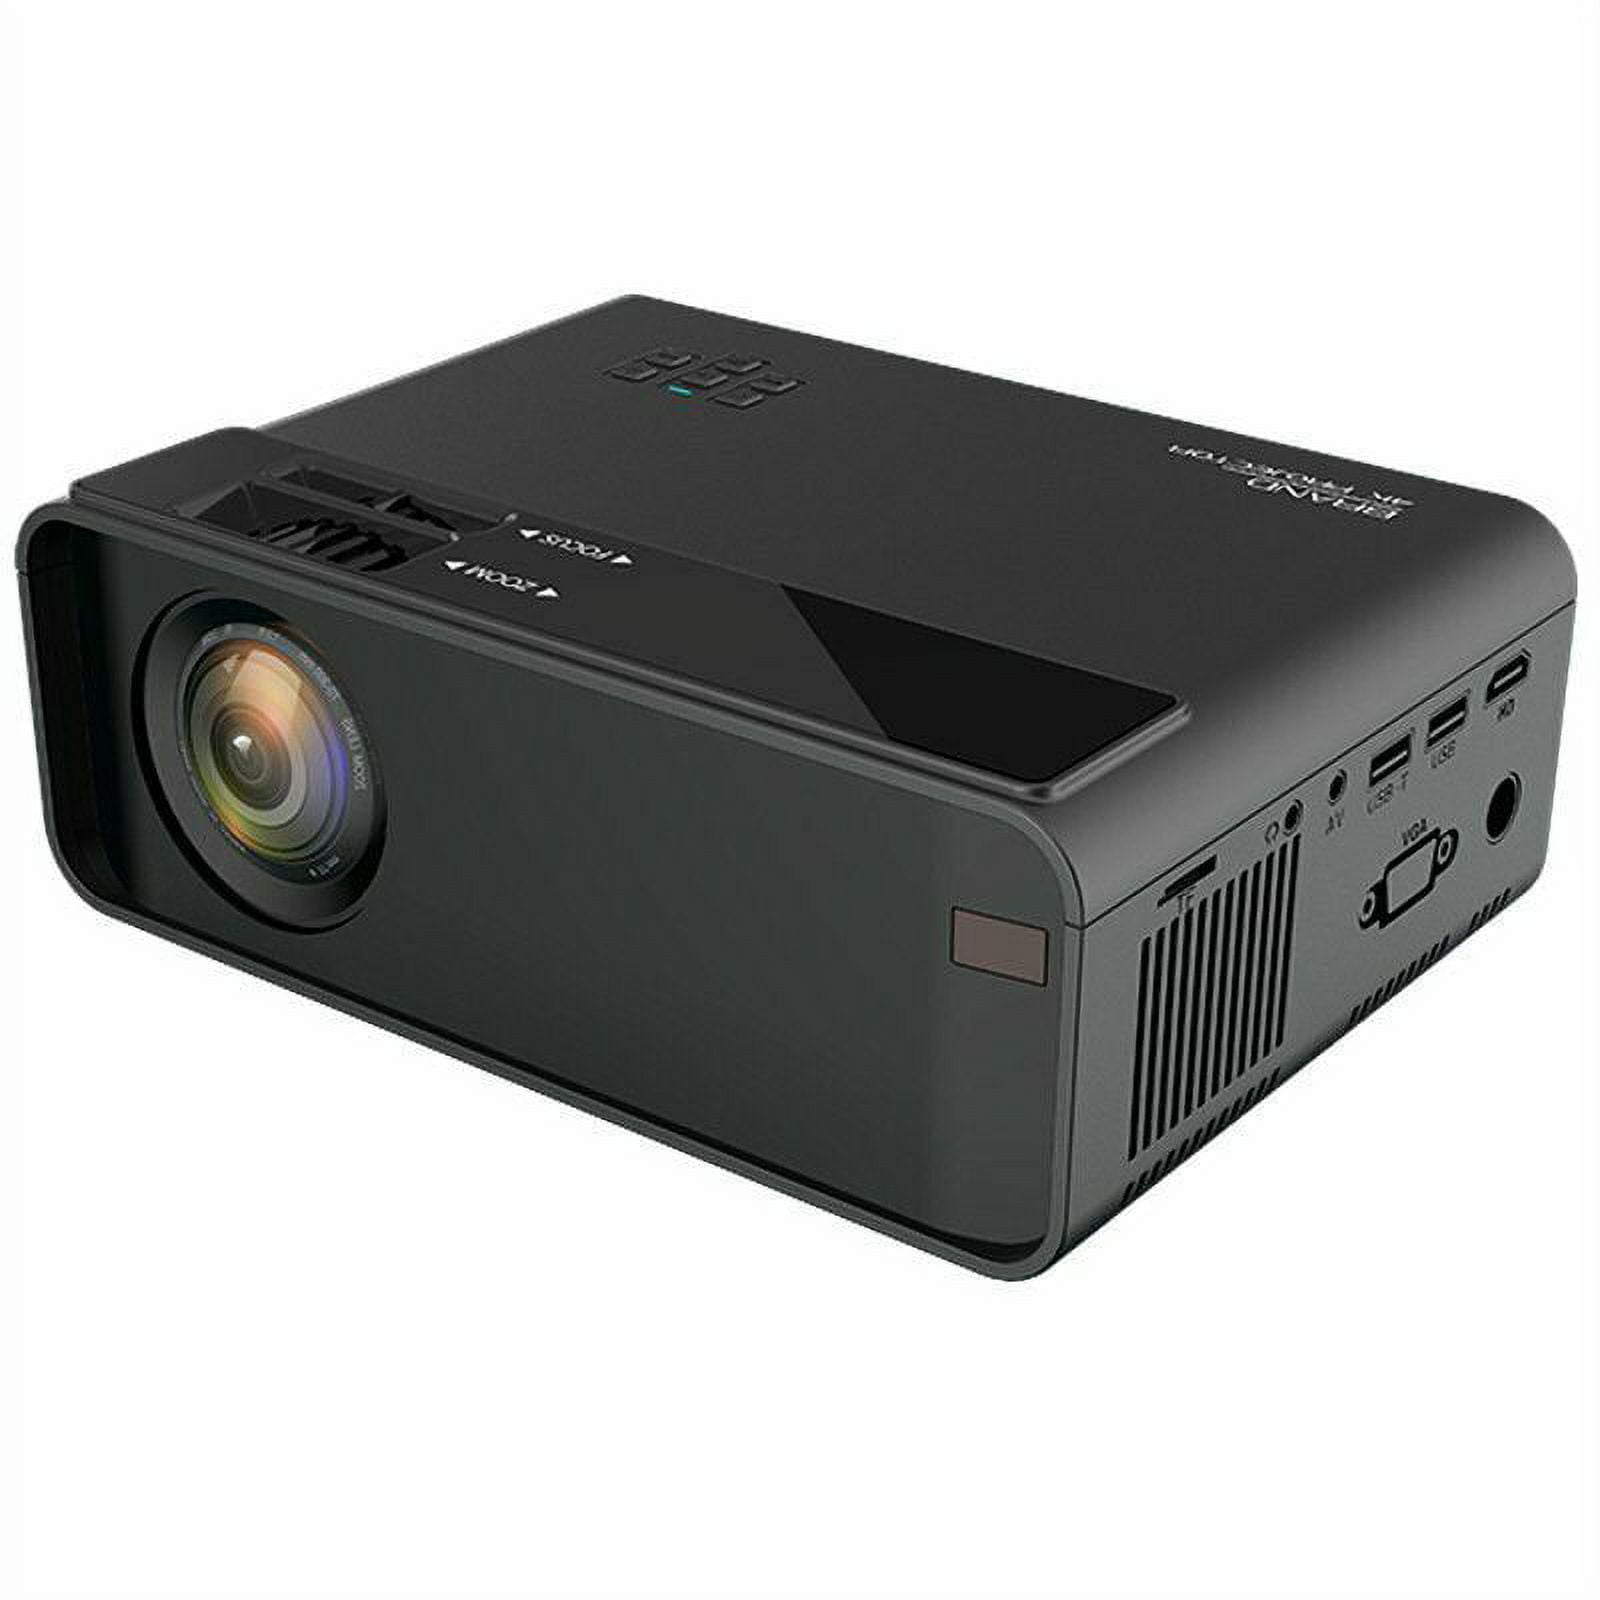 Full HD Projector Quad Core Android 4.4.2 OS, WiFi Projector 1080P With  HDMI USB Support MKV 1920*1080 Moive Free Shipping